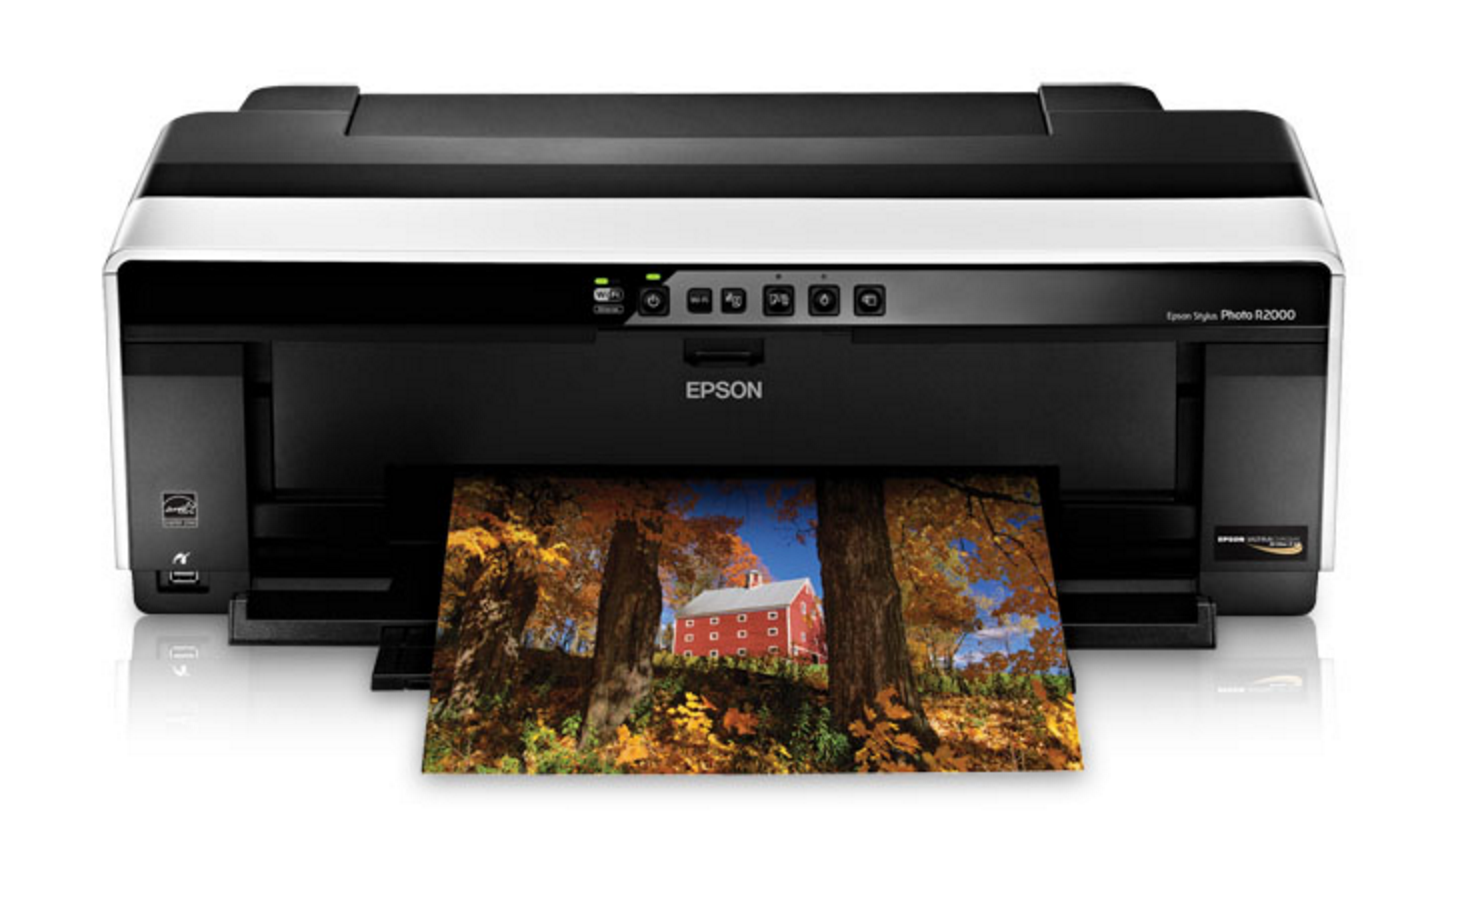 Cool gifts for photographers: Epson Stylus Photo R2000 Color Inkjet Wide Format Printer